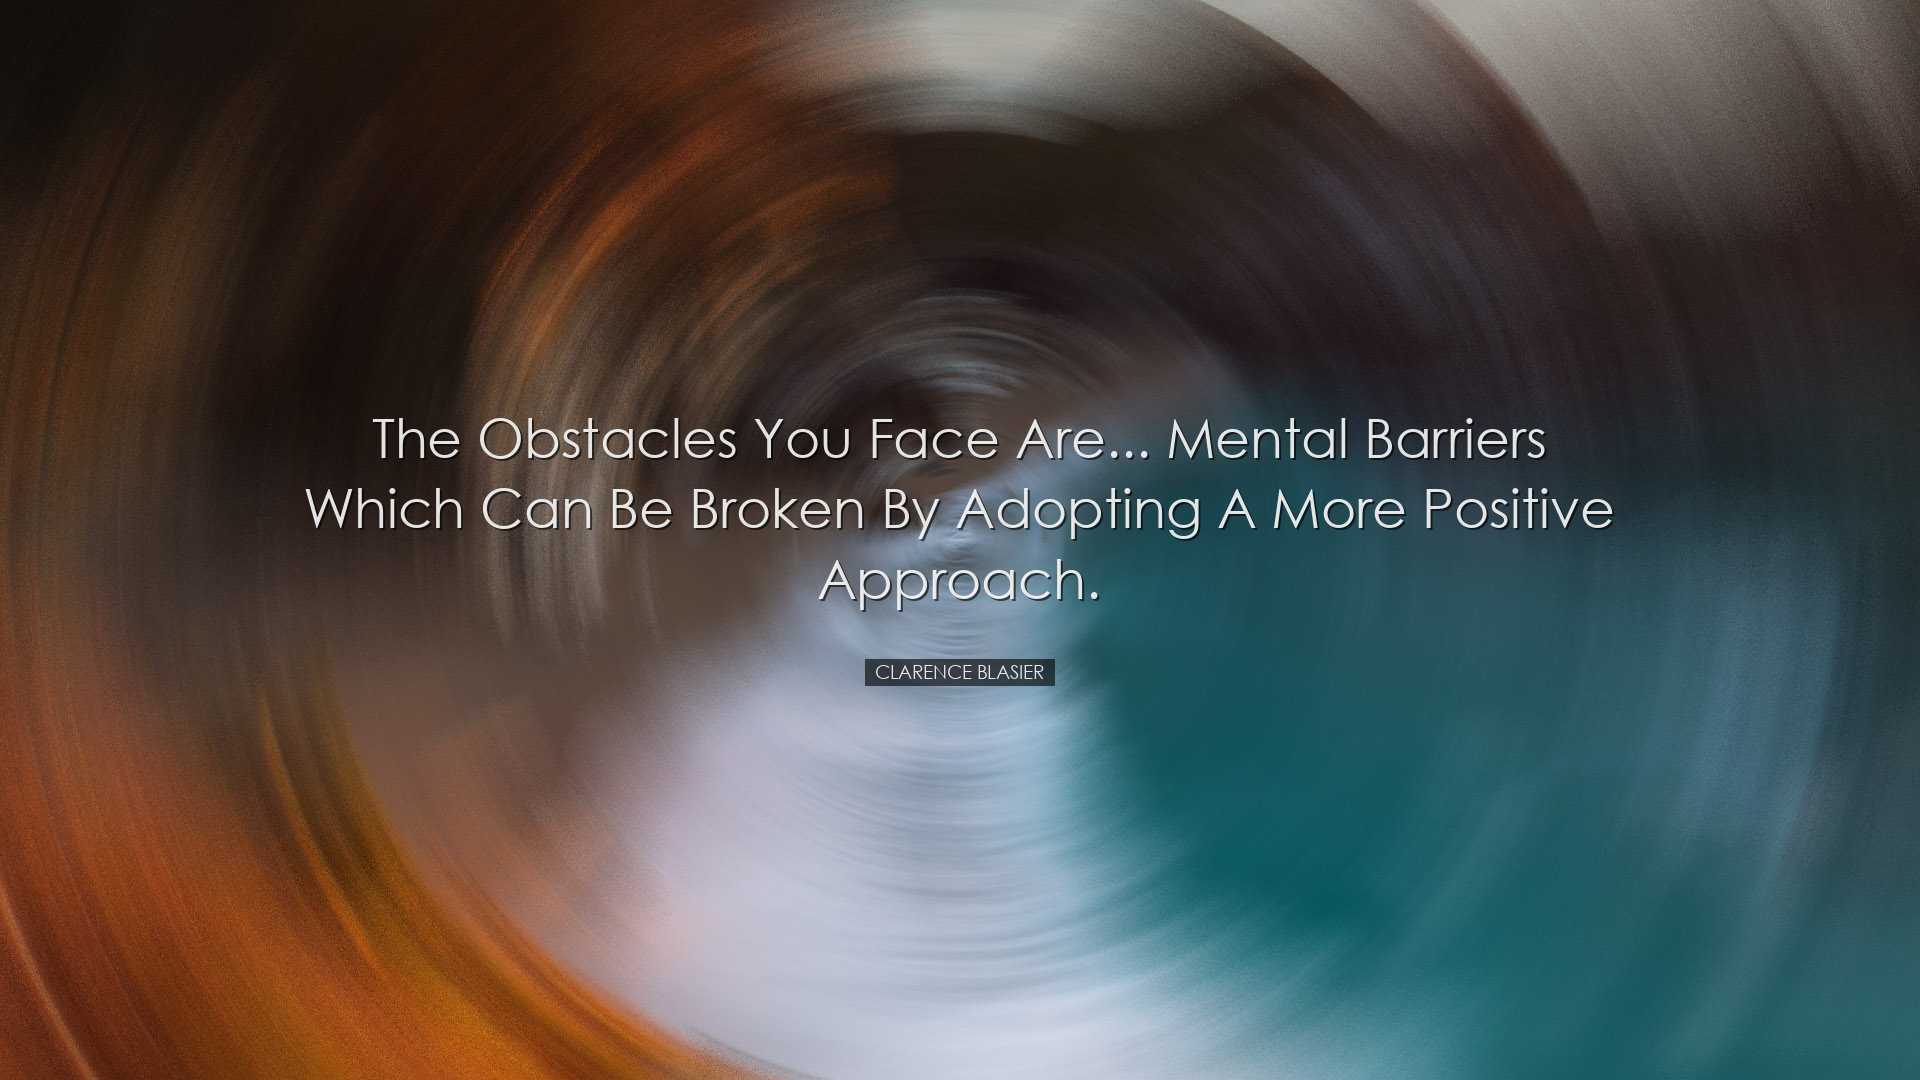 The obstacles you face are... mental barriers which can be broken